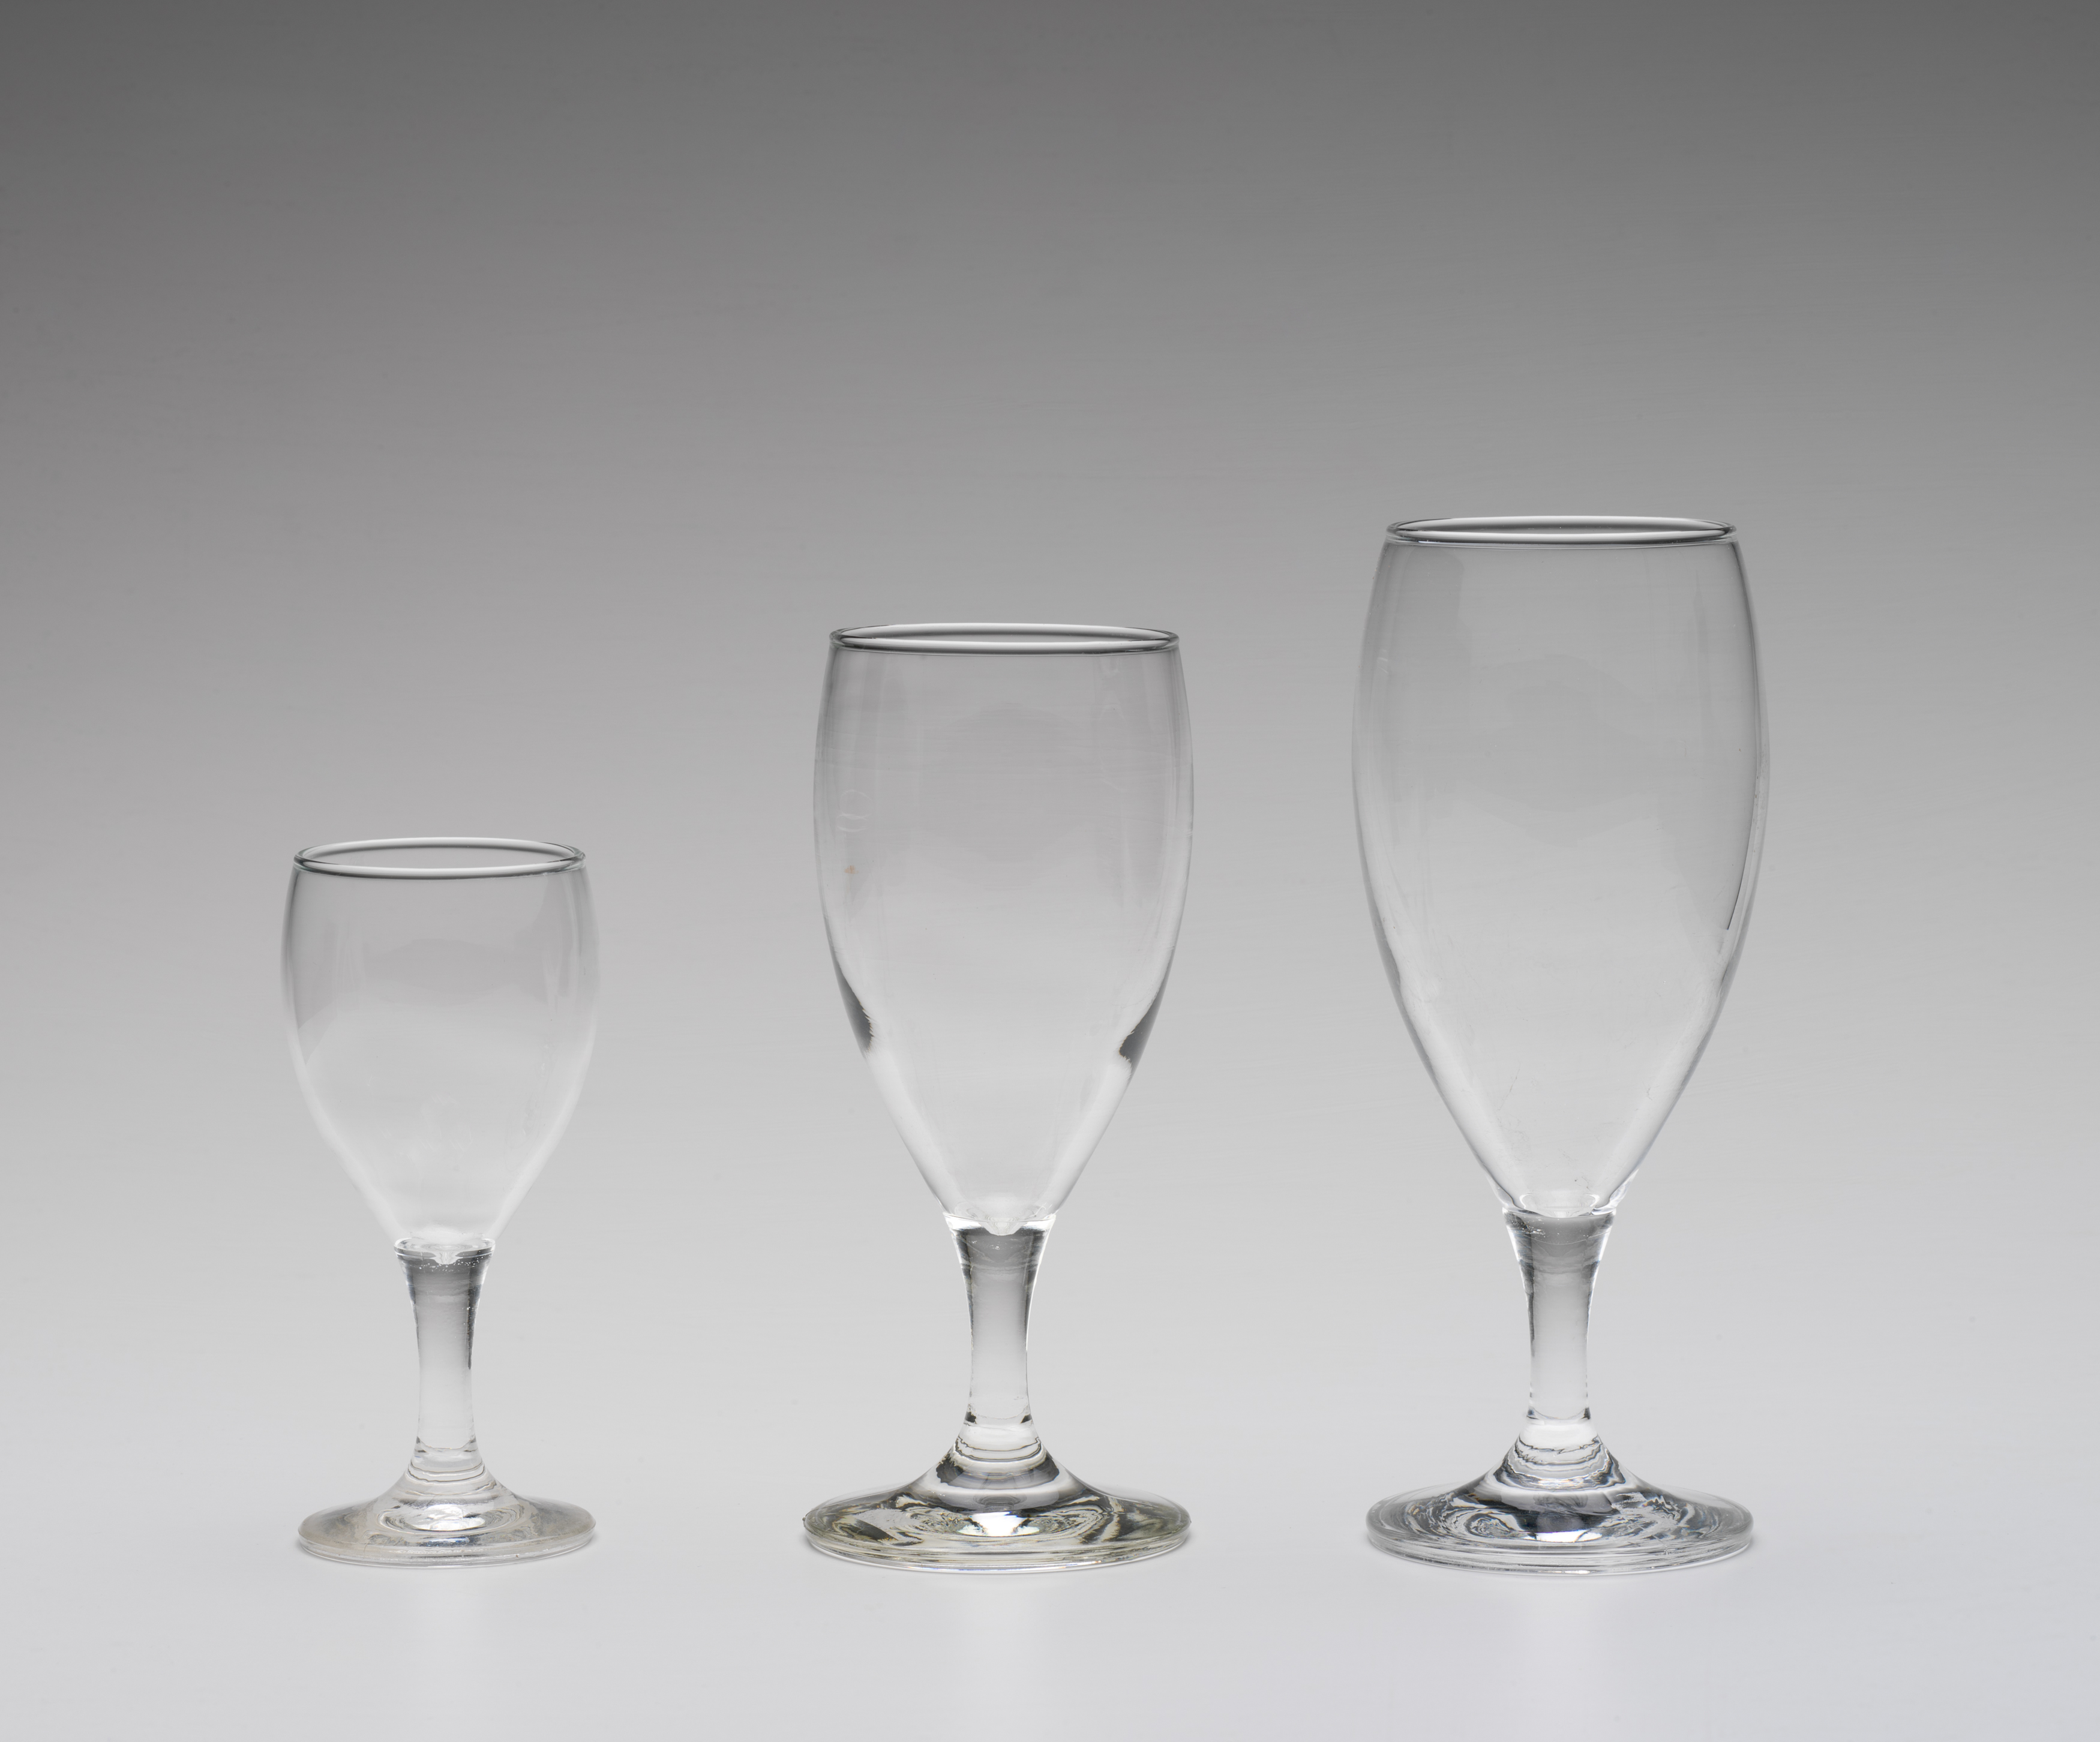 Three wine glasses of different sizes on a grey background.